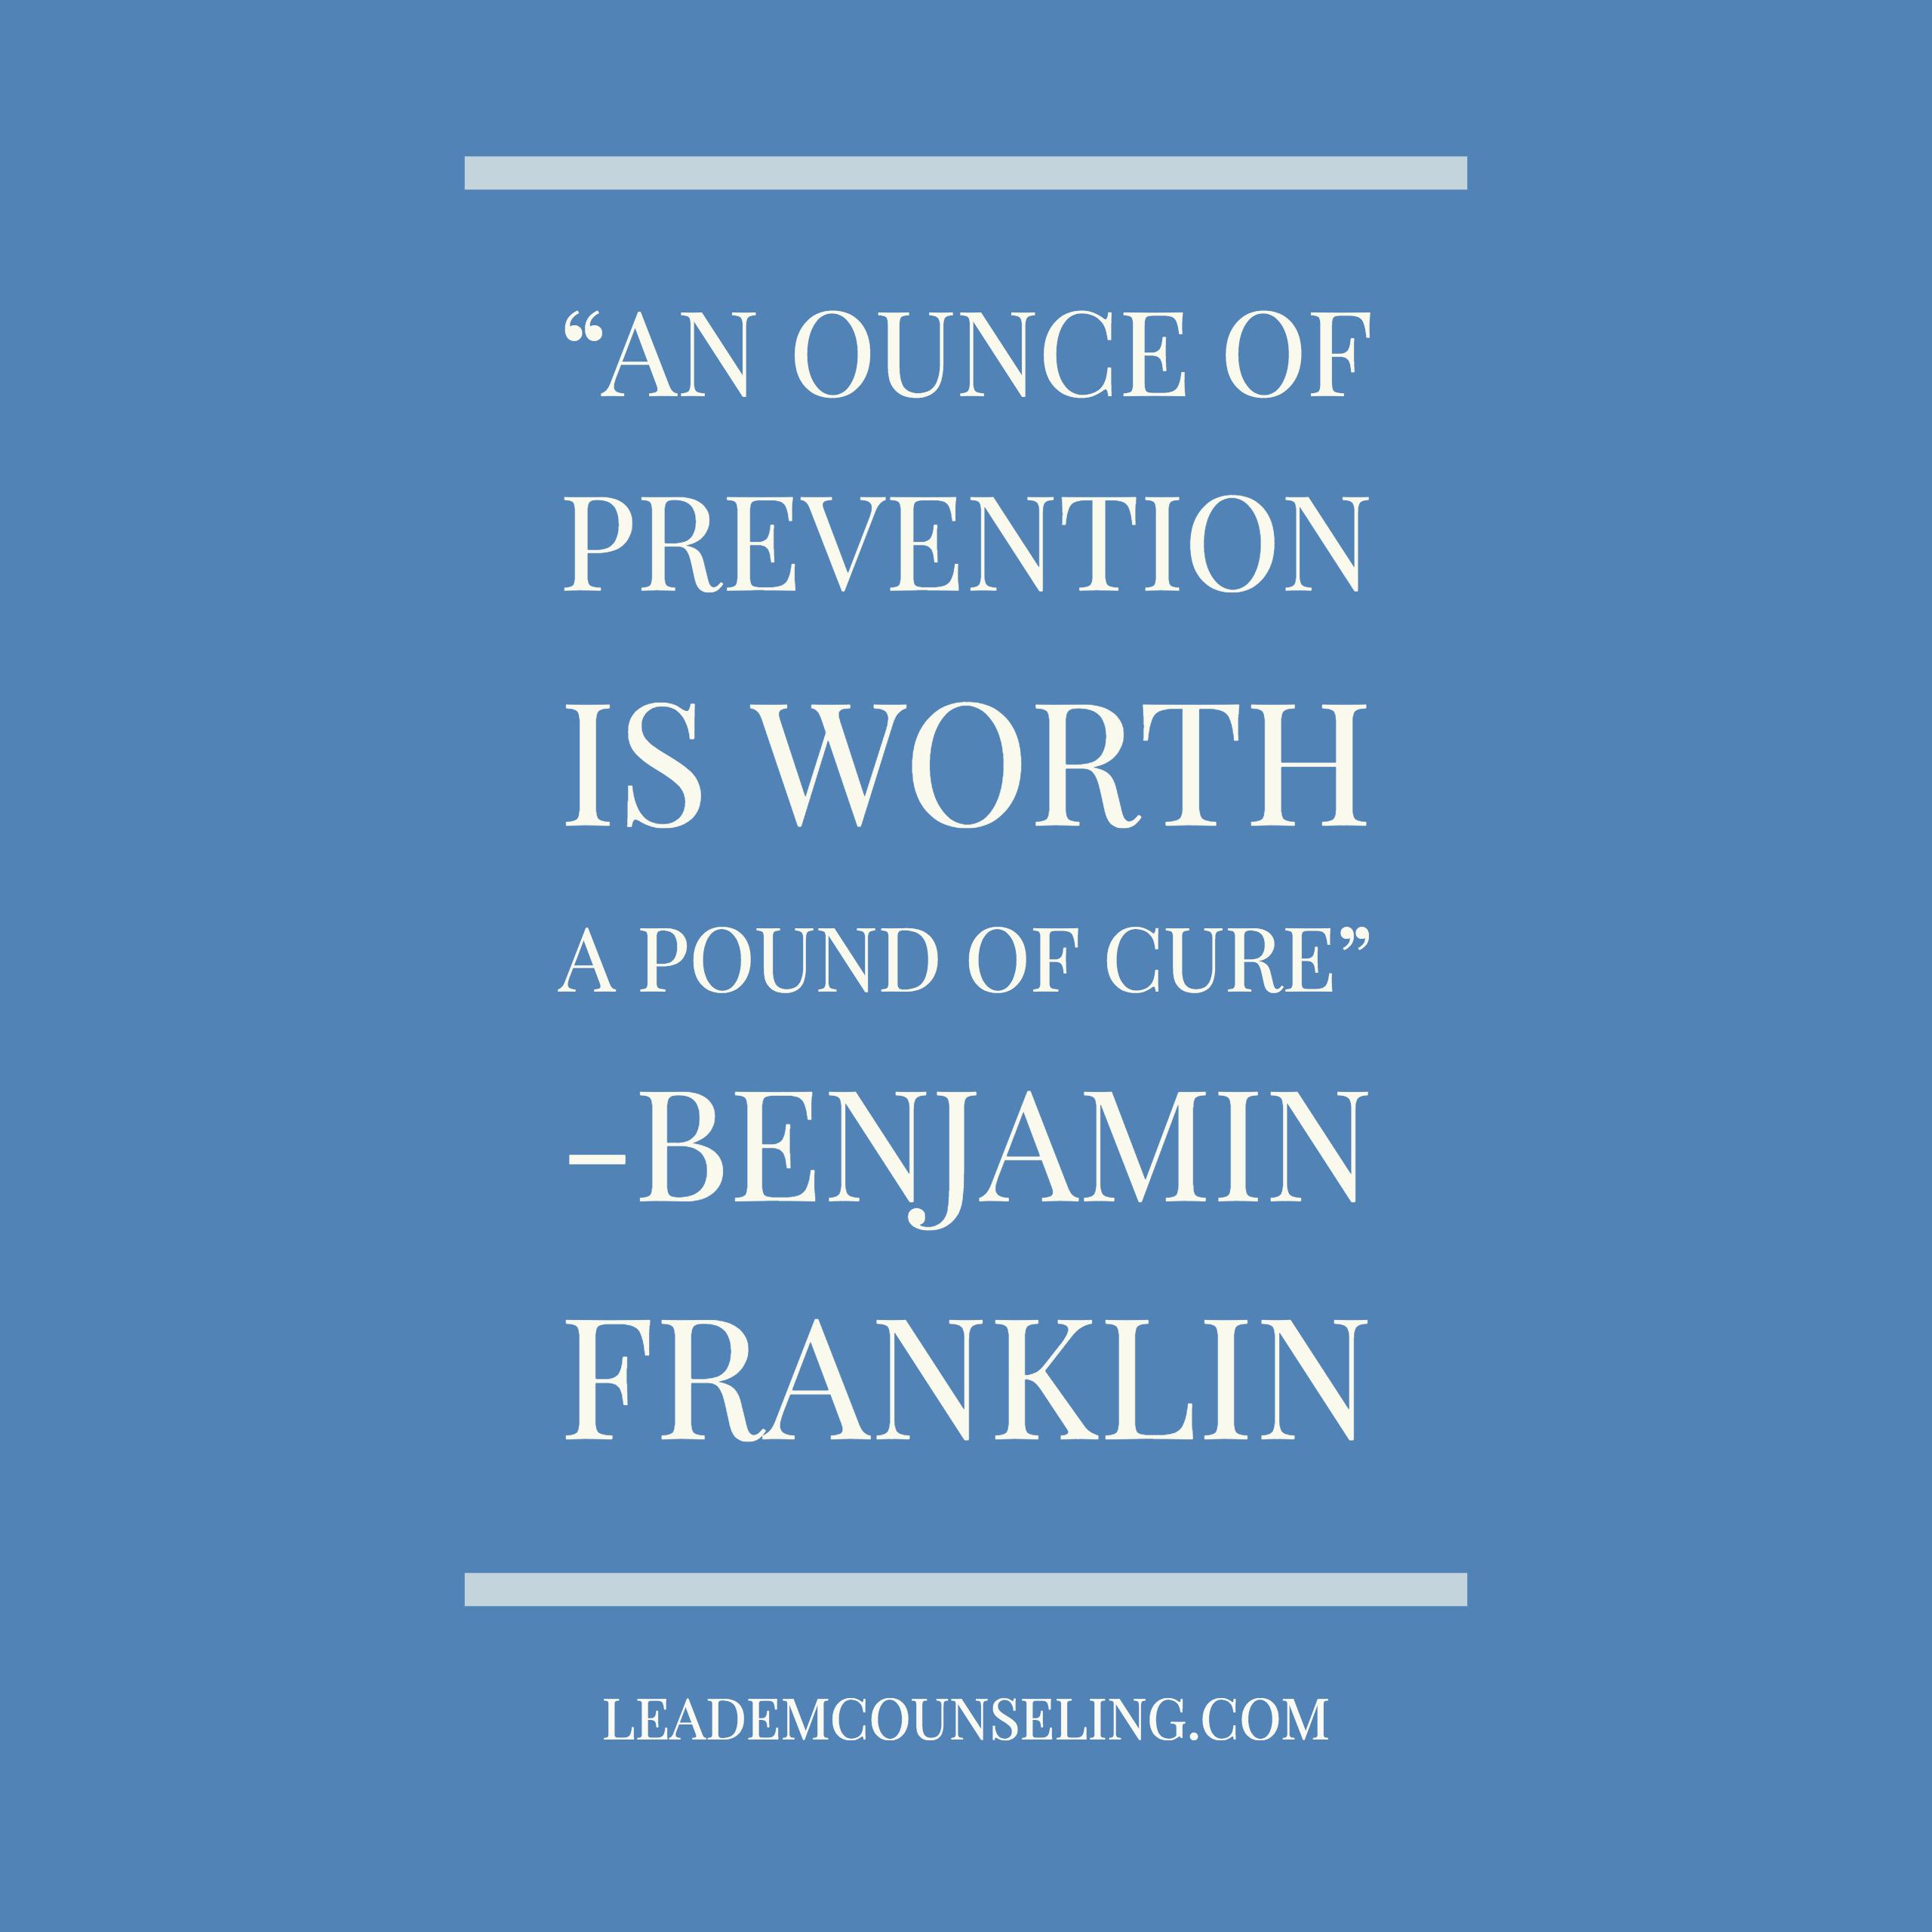 An ounce of prevention is worth a pound of cure- Benjamin Franklin